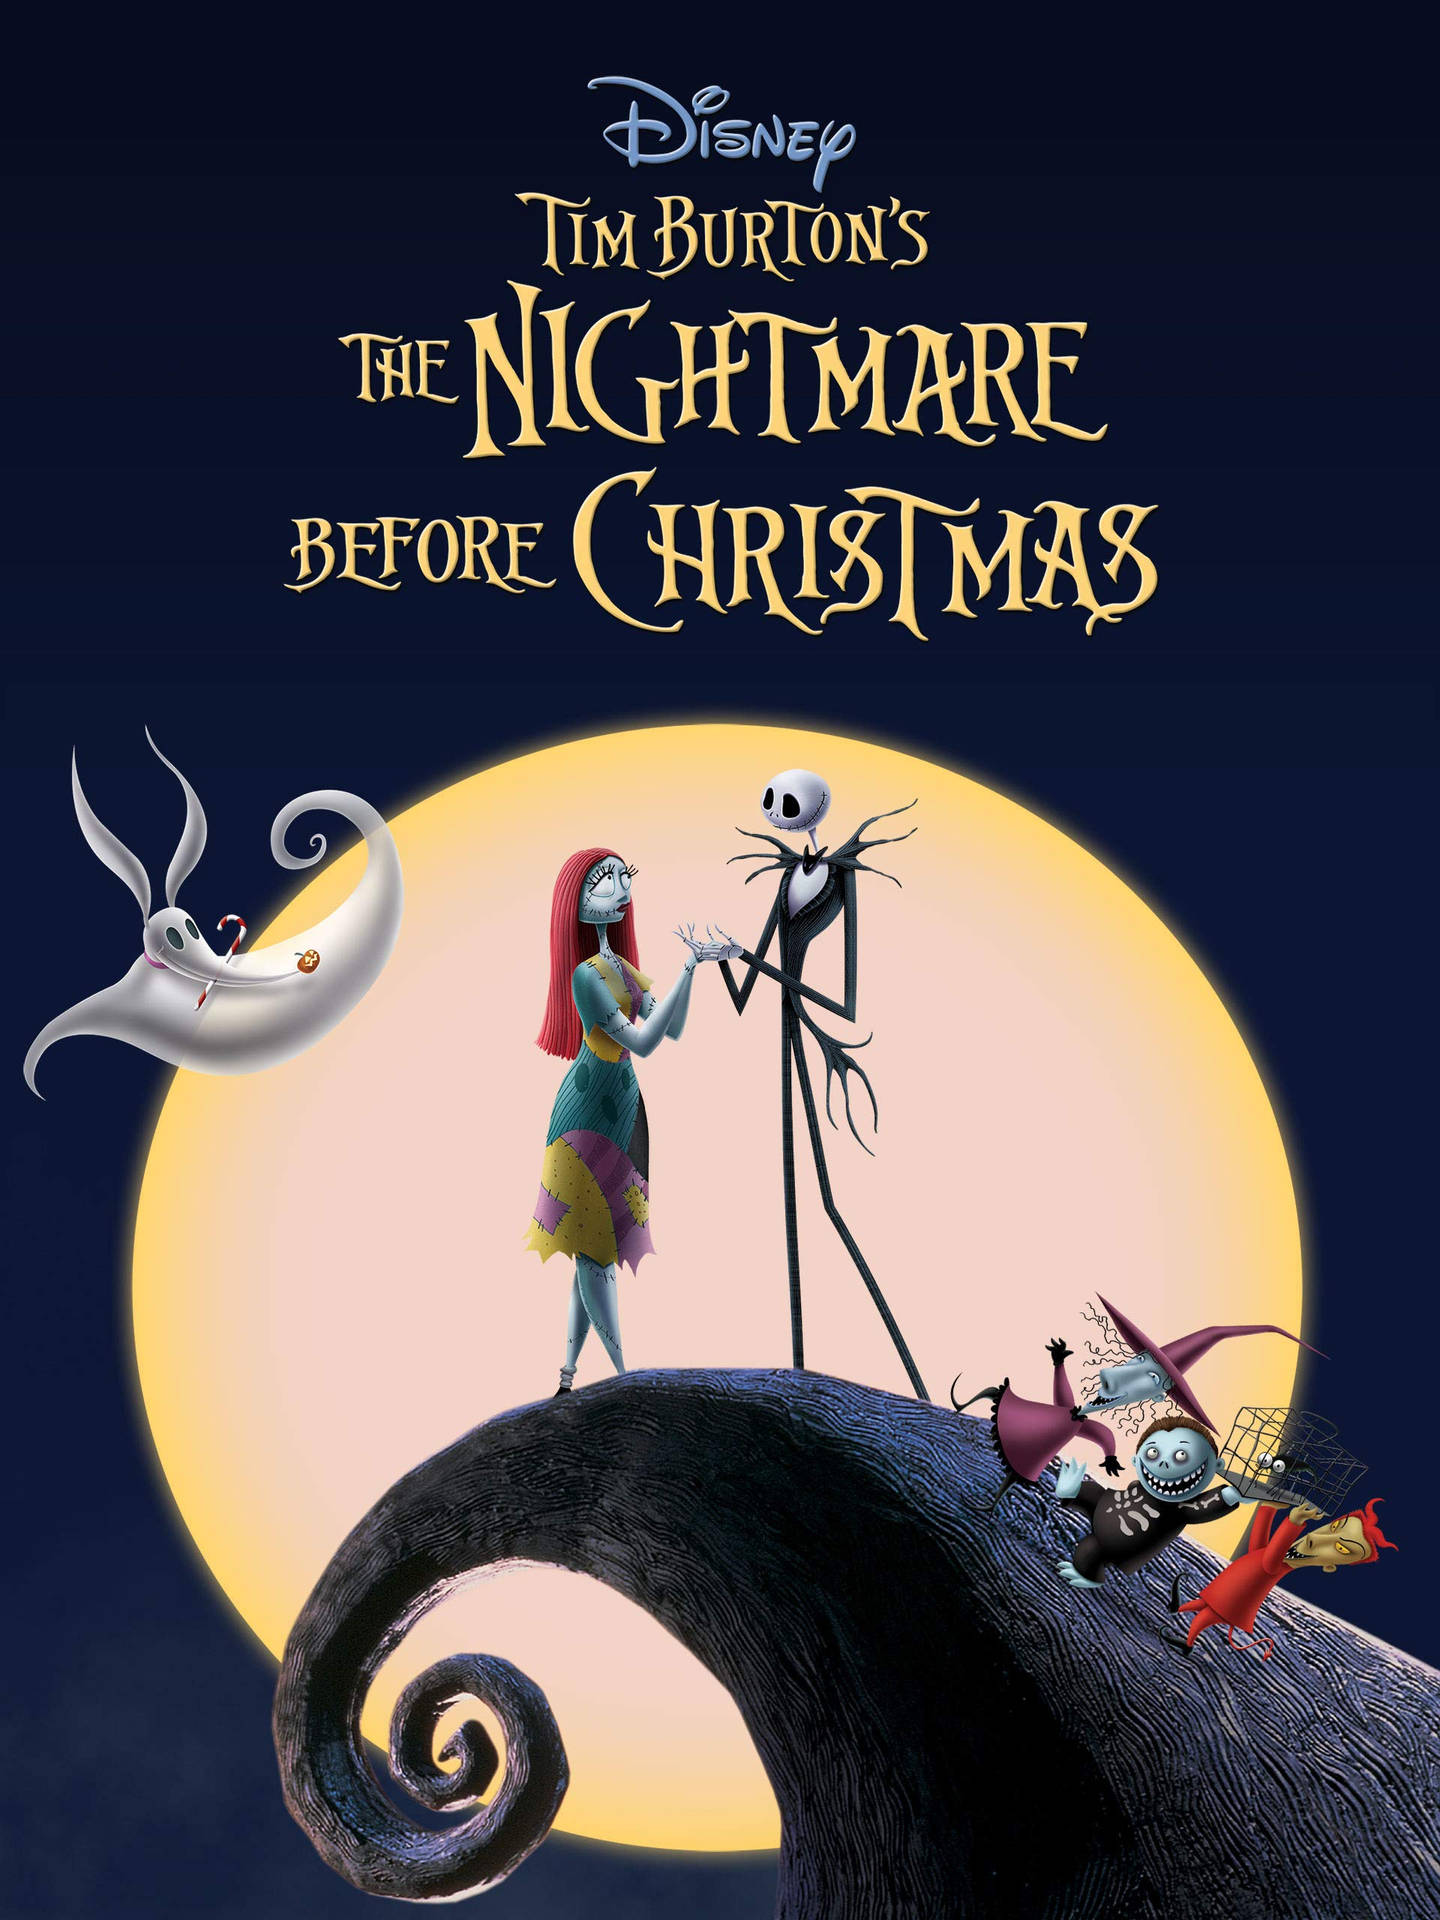 The Nightmare Before Christmas Movie Poster